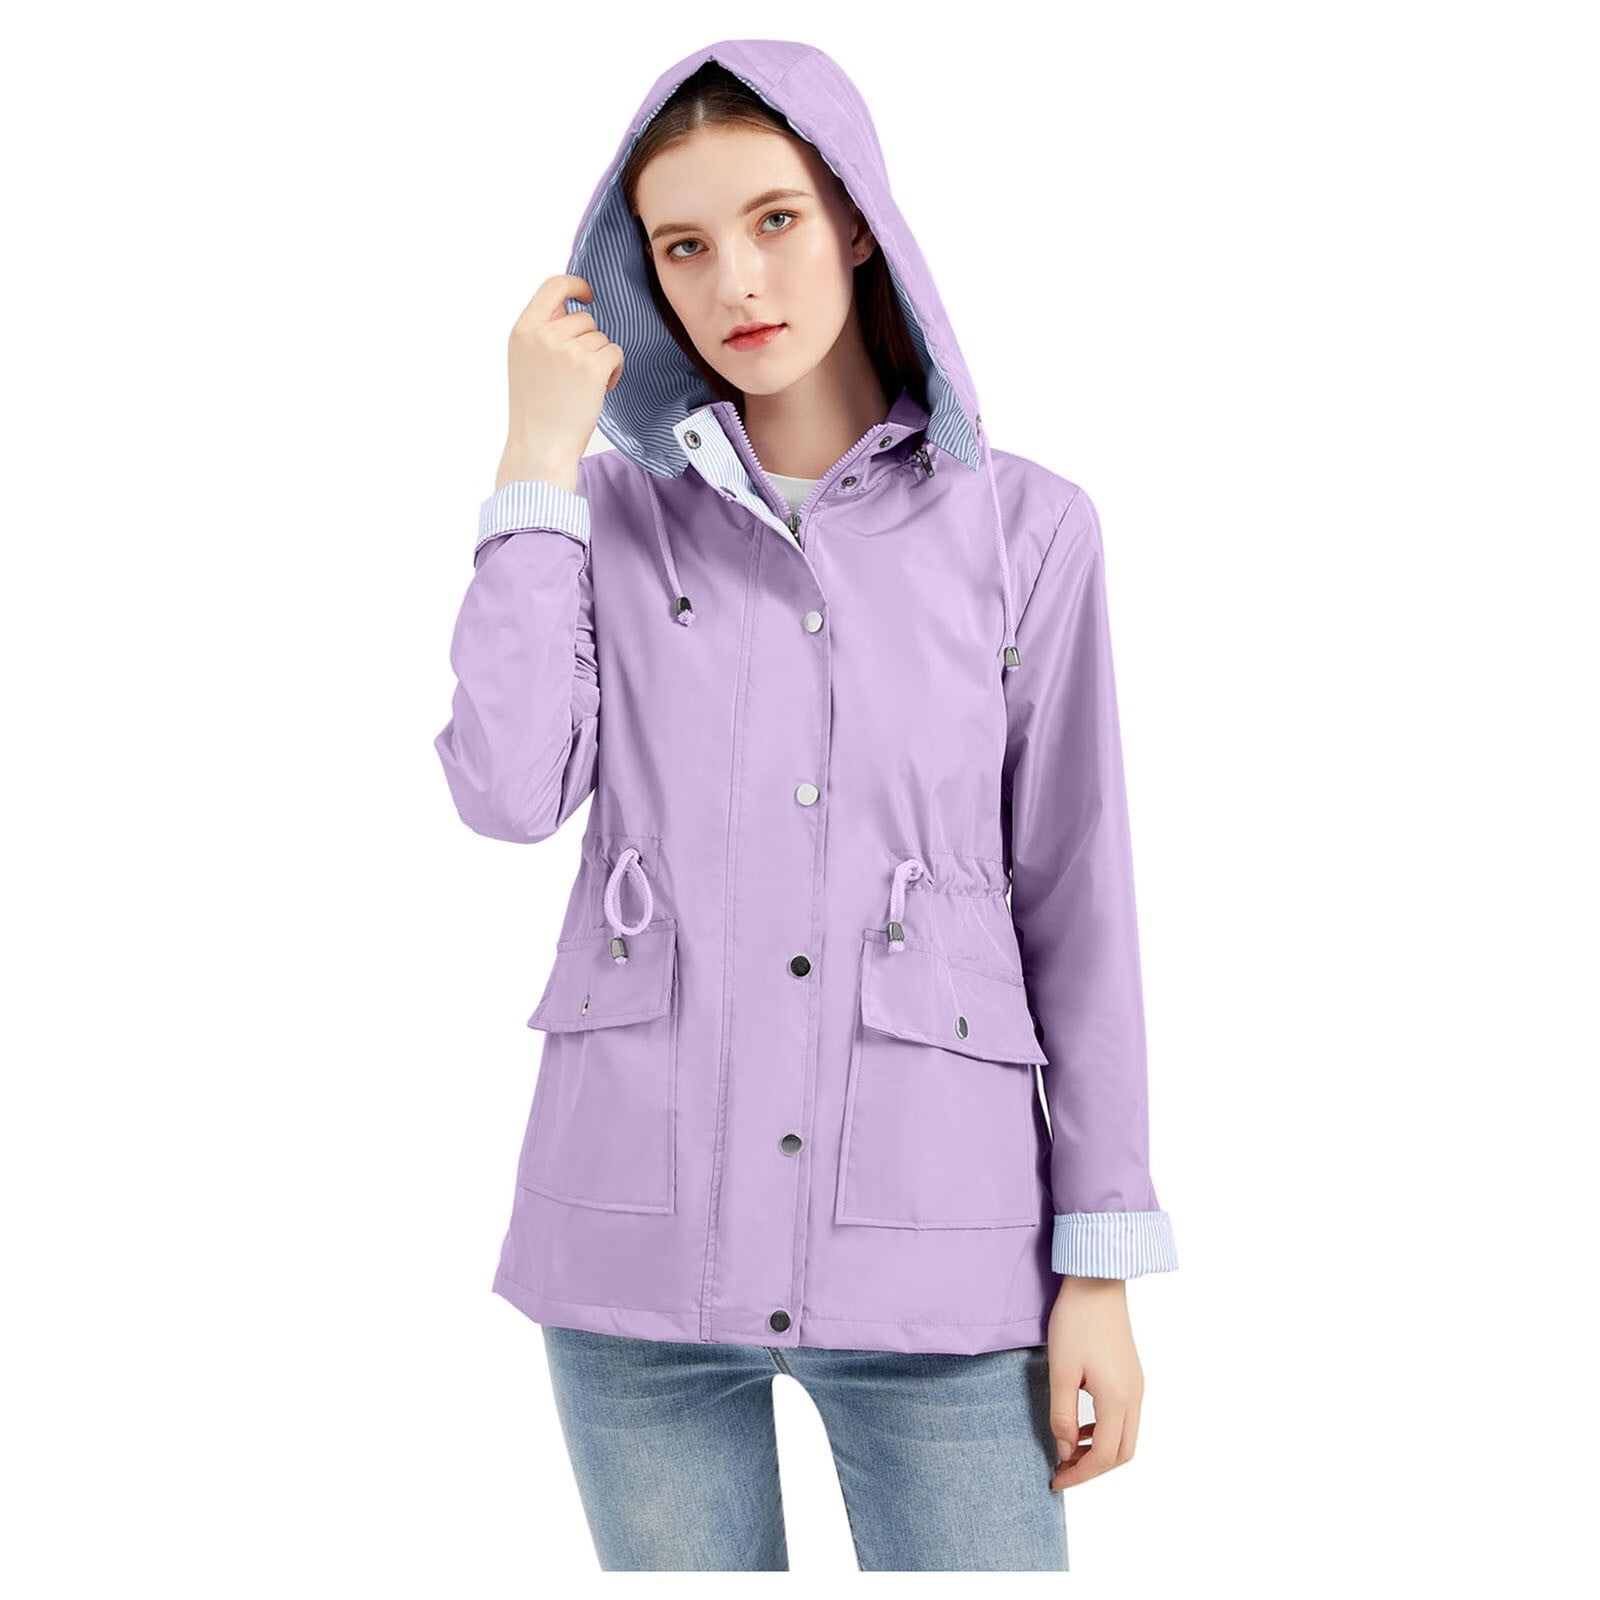 Mortilo Women Rain Jacket , Solid Lightweight Removable Hood Sport Fishing  Jacket Winter Fall Outfits For Outdoor Active Purple XL 